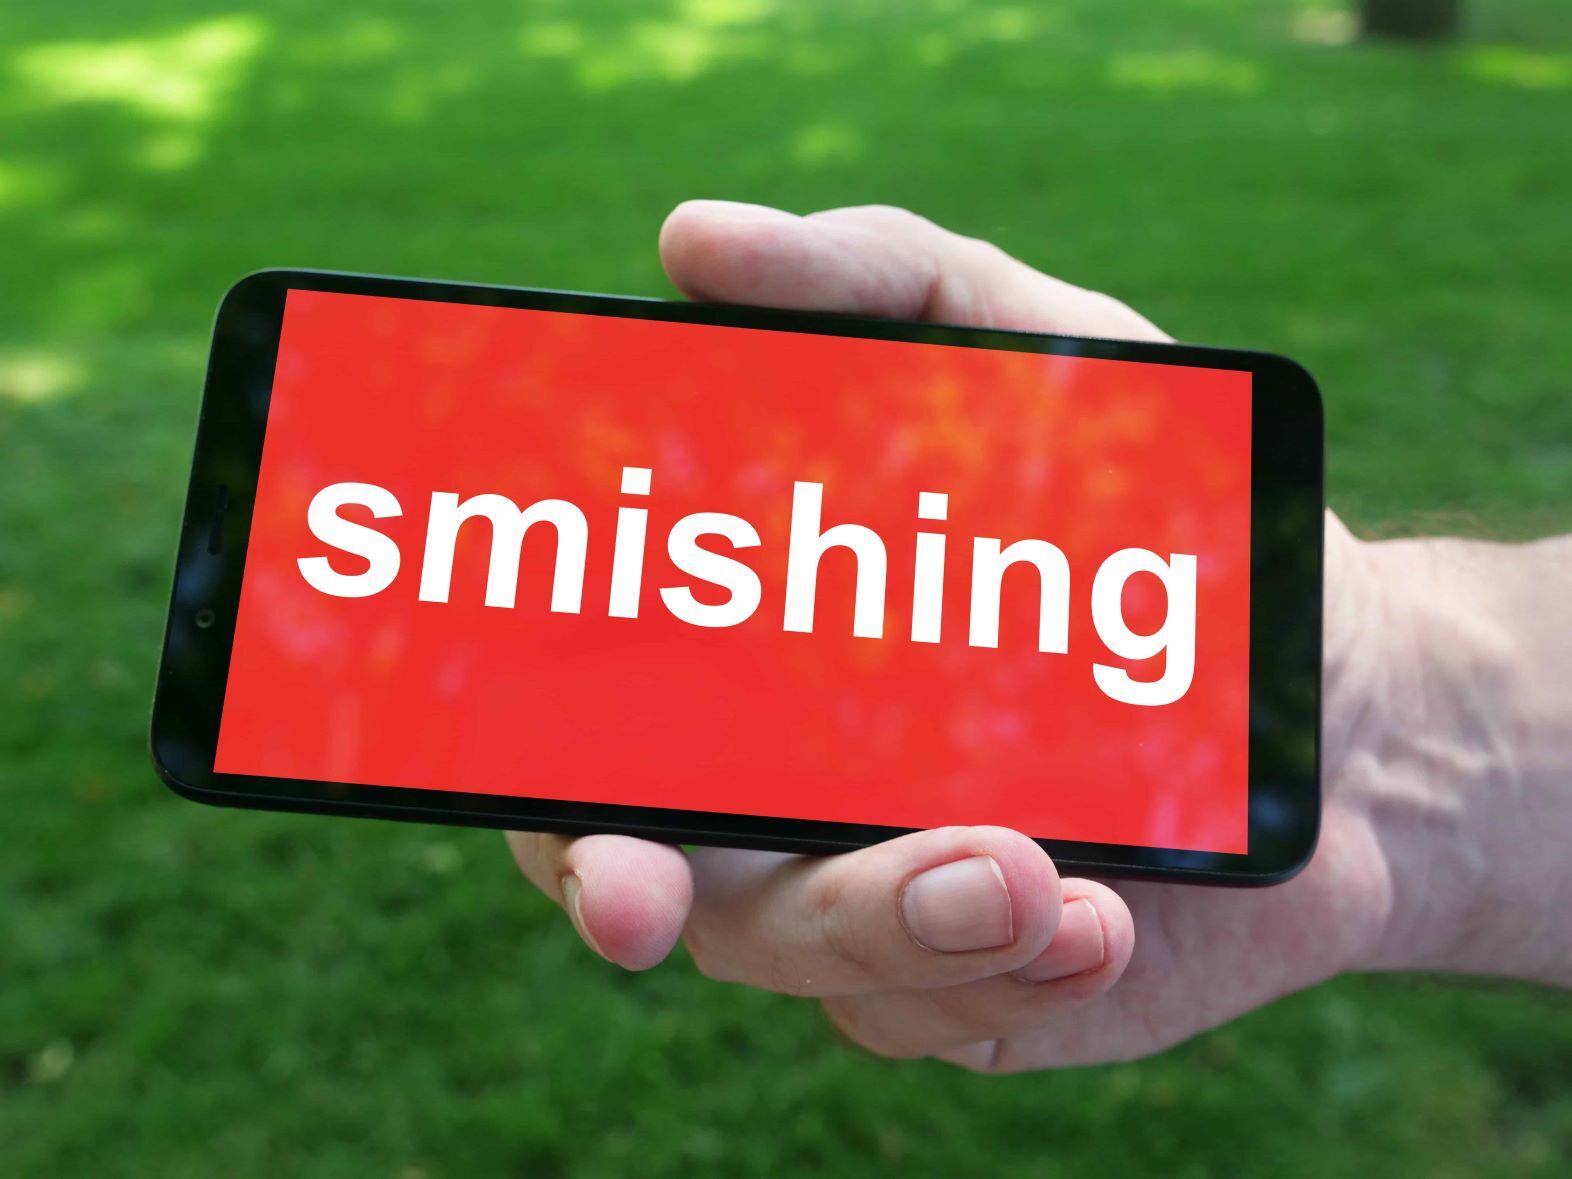 Smishing is shown on the conceptual photo using the text